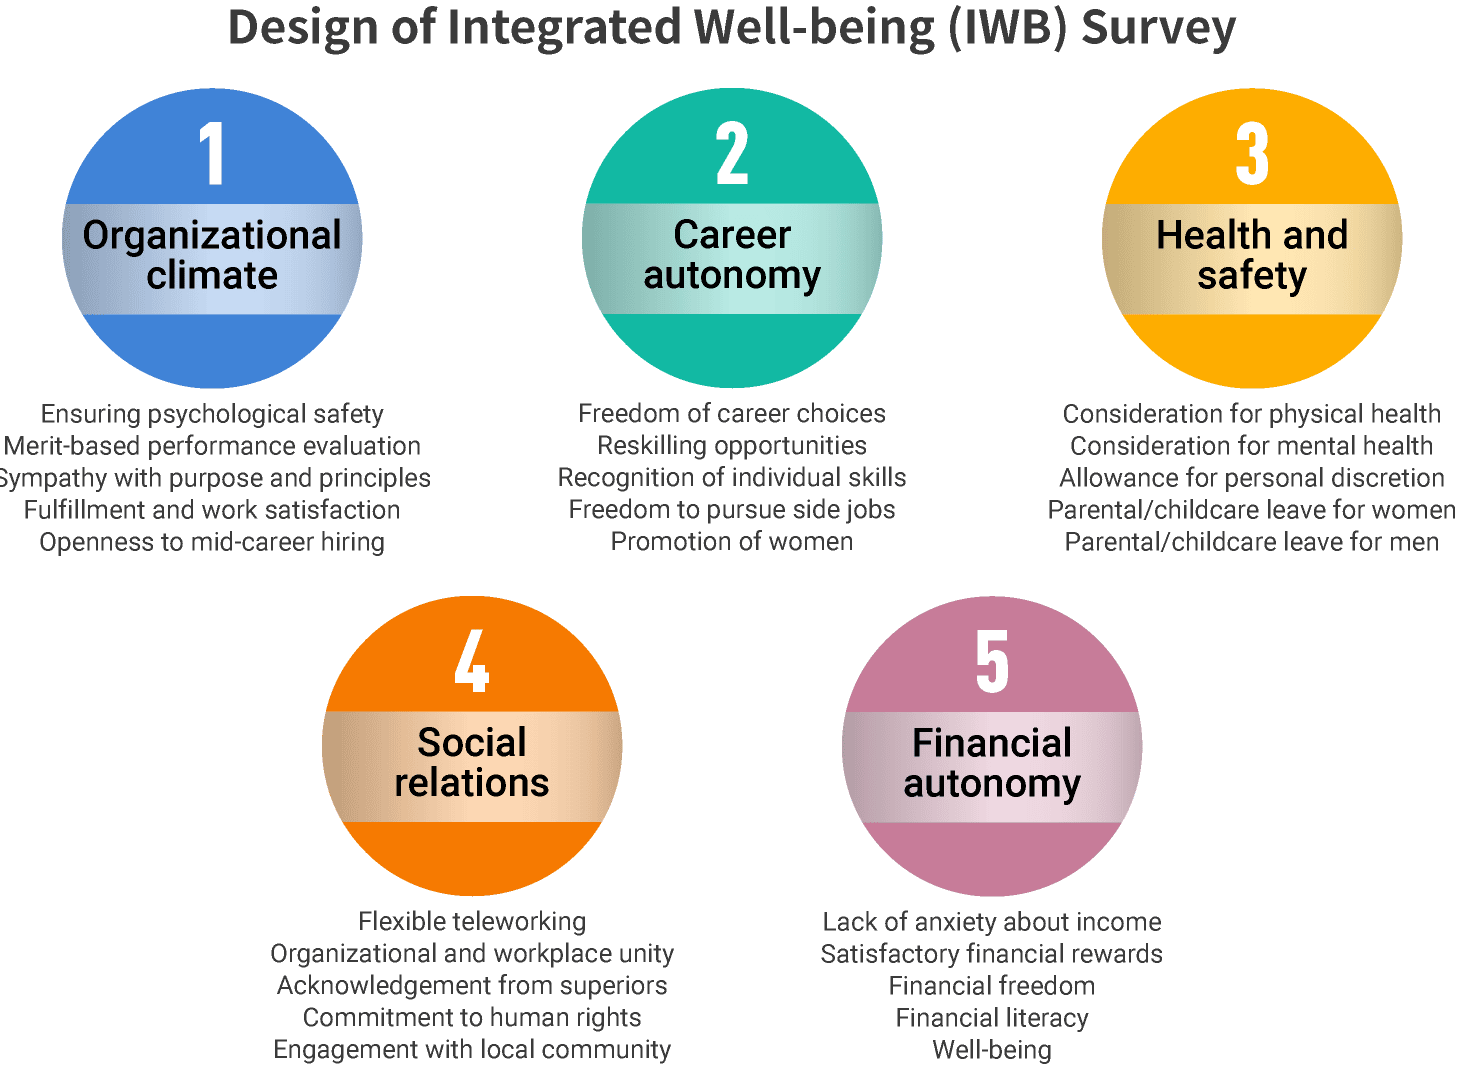 Design of Integrated Well-being (IWB) Survey